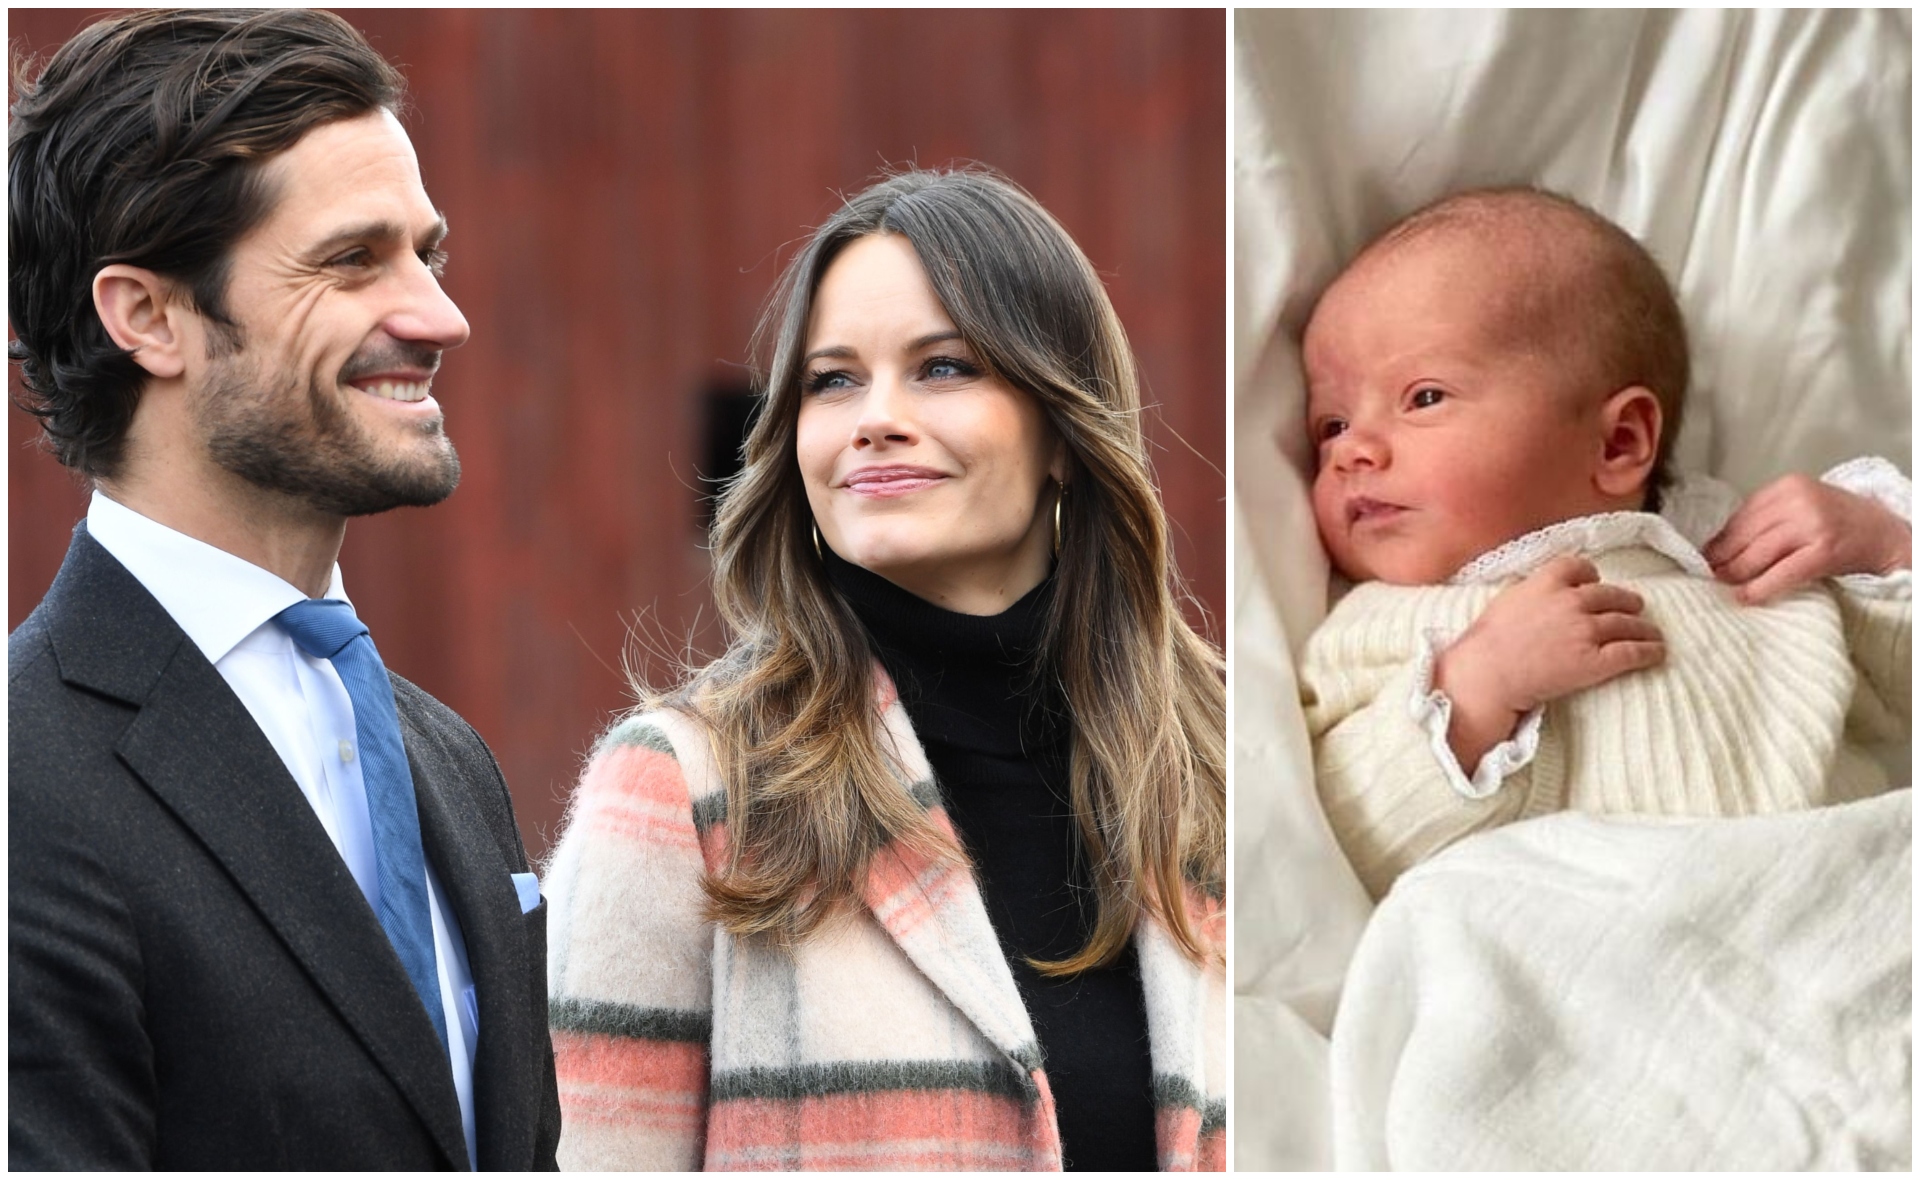 Prince Carl Philip follows in Duchess Catherine’s footsteps as he and Princess Sofia of Sweden release the first photo of their newborn baby son